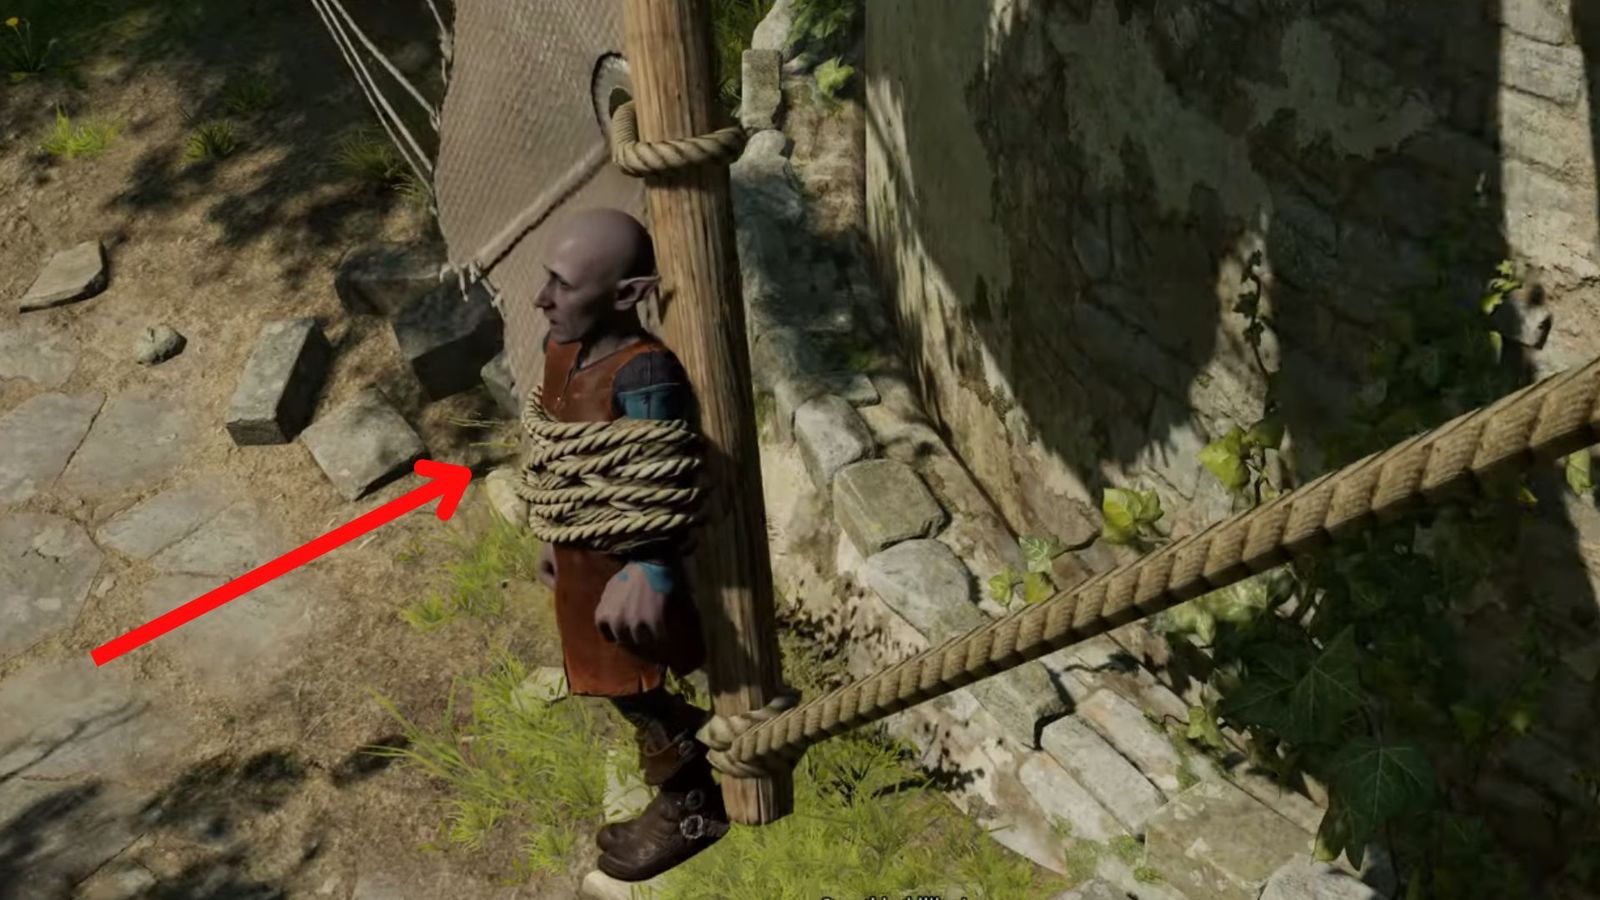 A screenshot of the gnome tied up with rope in Baldur's Gate 3.